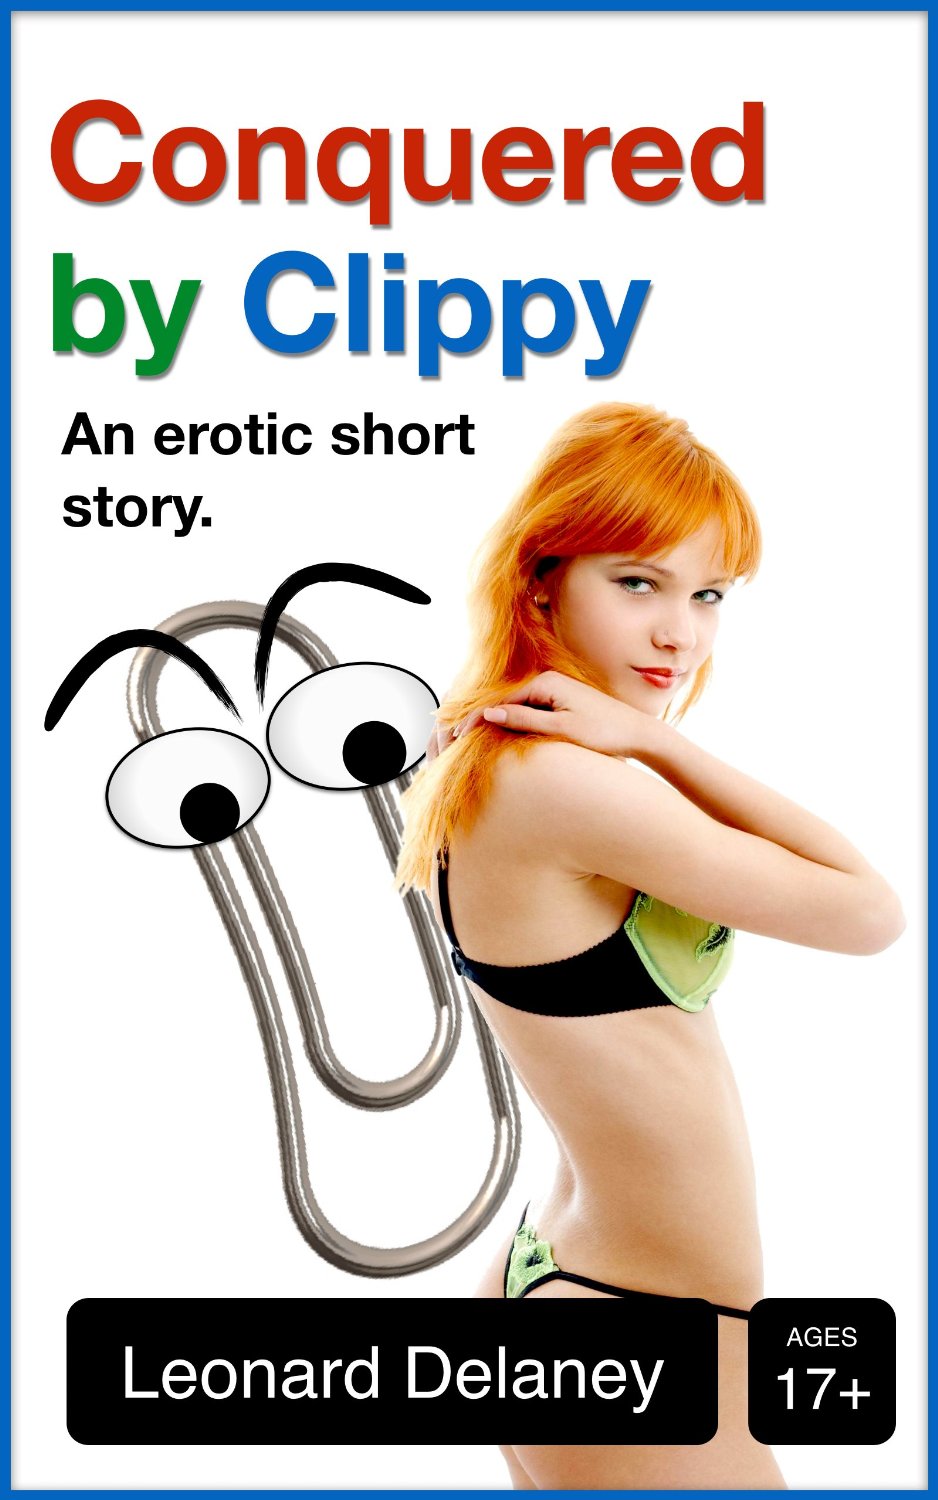 A porn novel about the MS Office Paperclip.